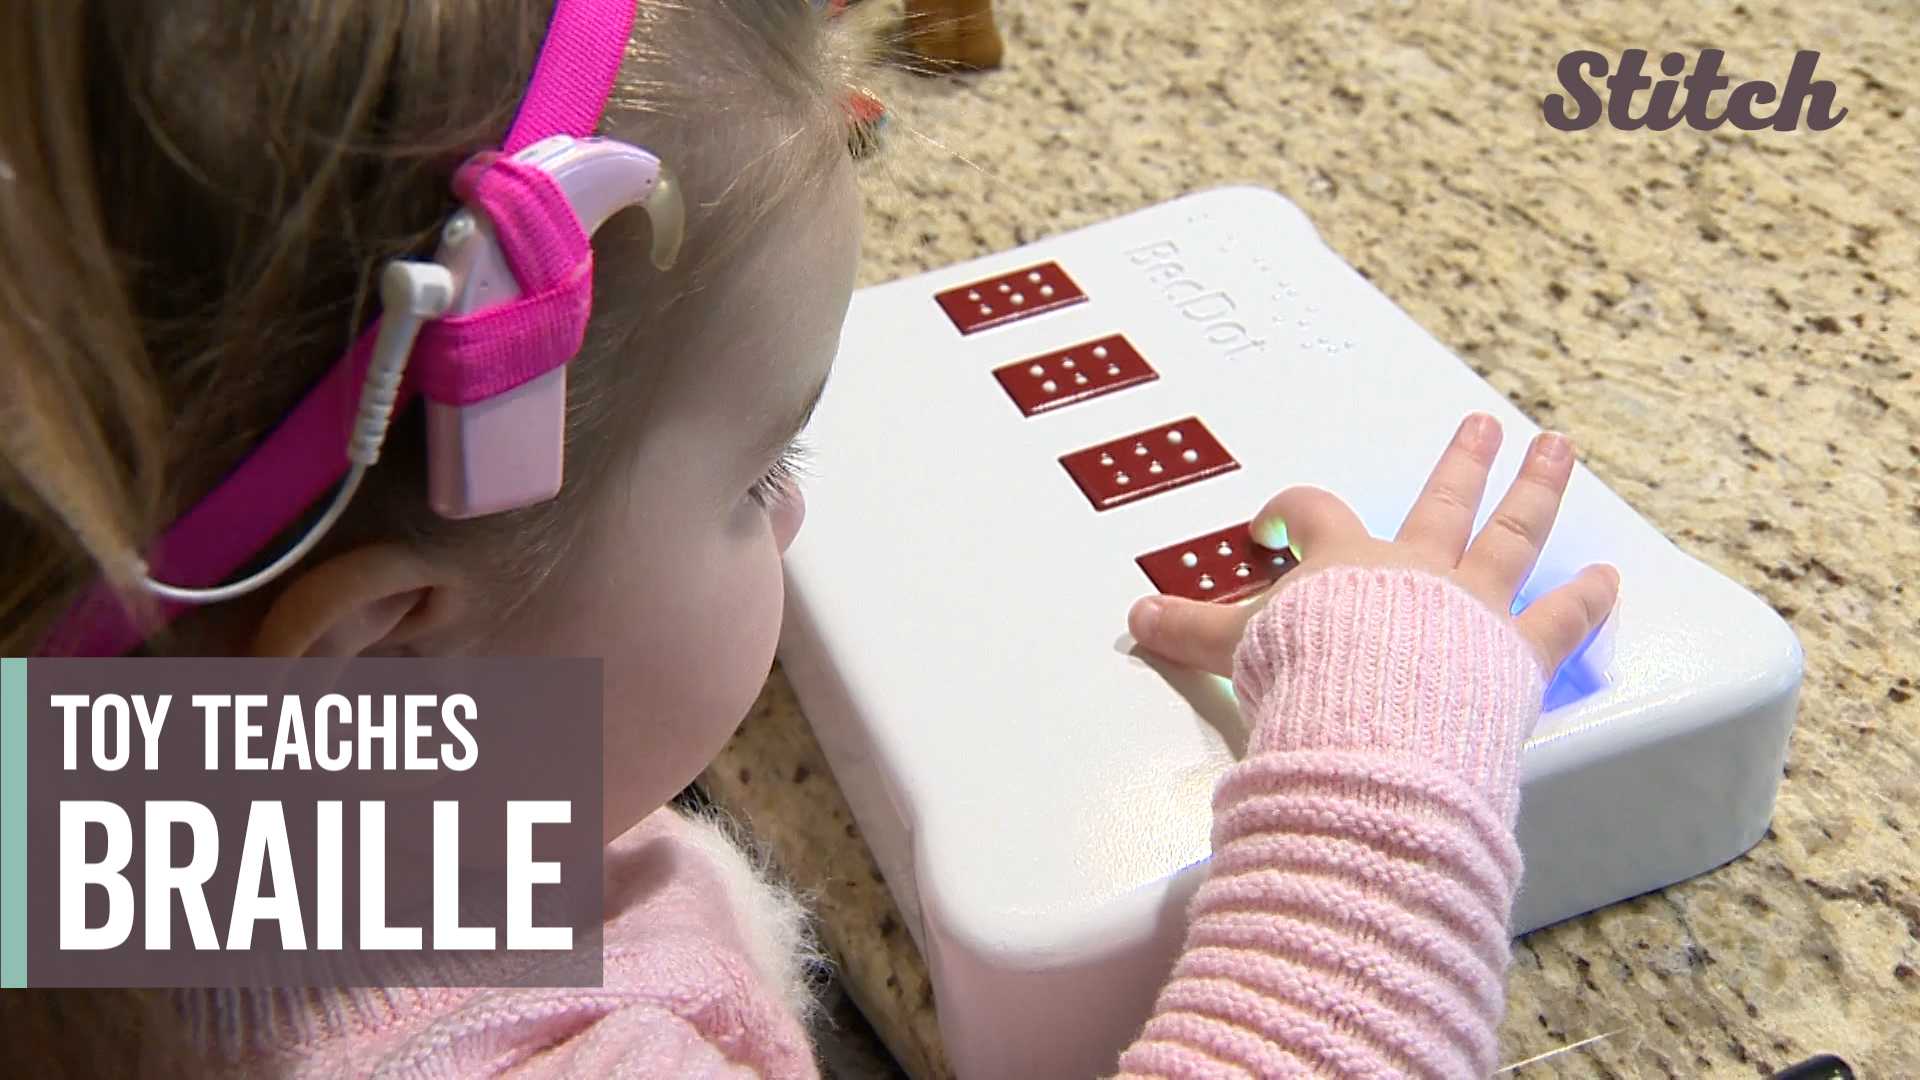 For daughter likely to go blind, father invents toy that teaches her braille